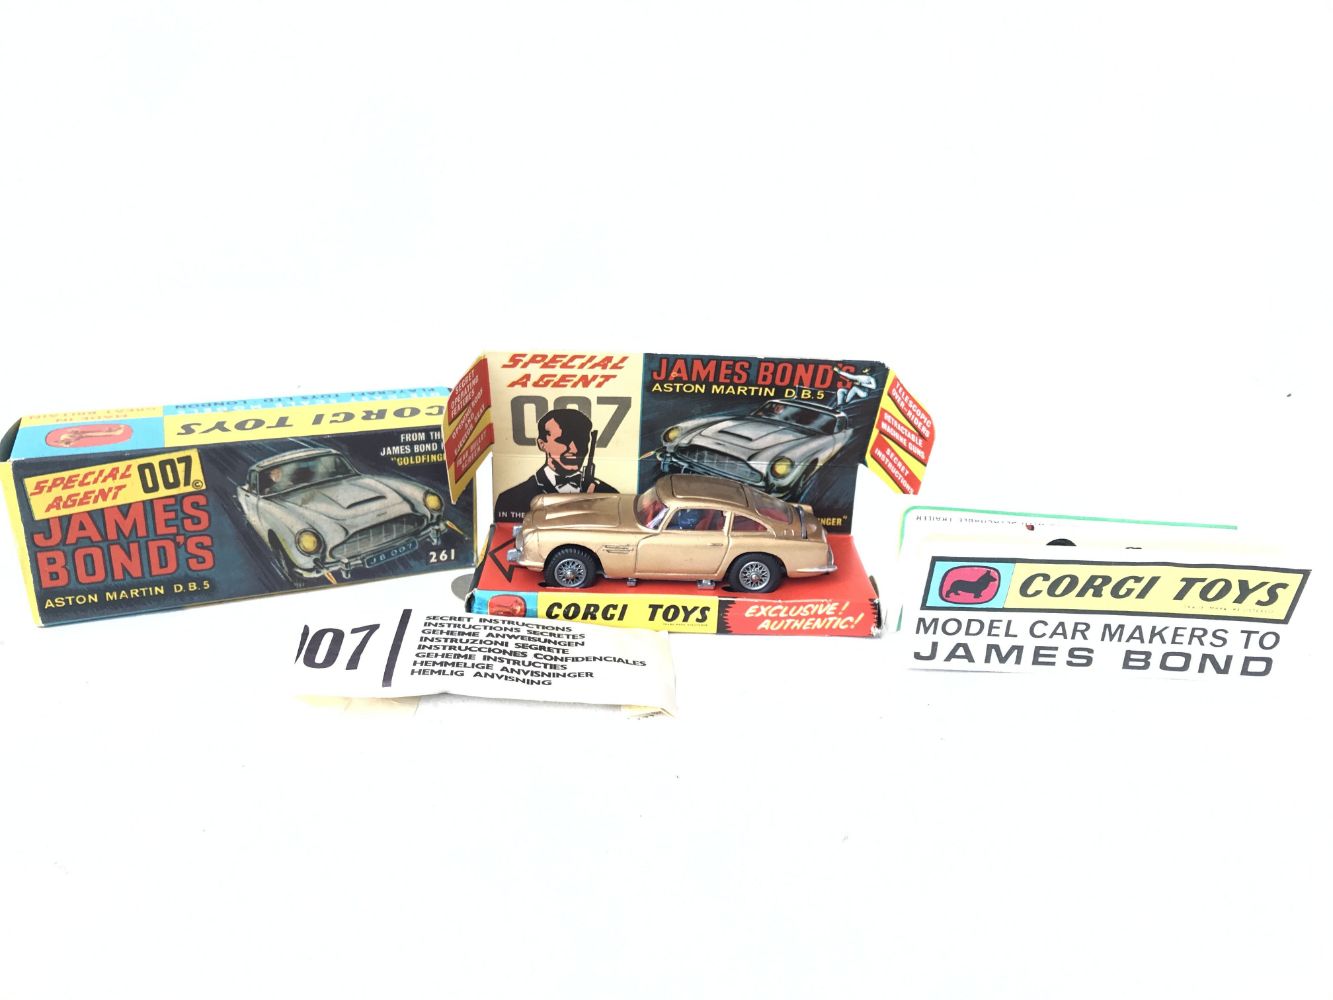 Specialist Toy & Model Auction - now commencing at 9am